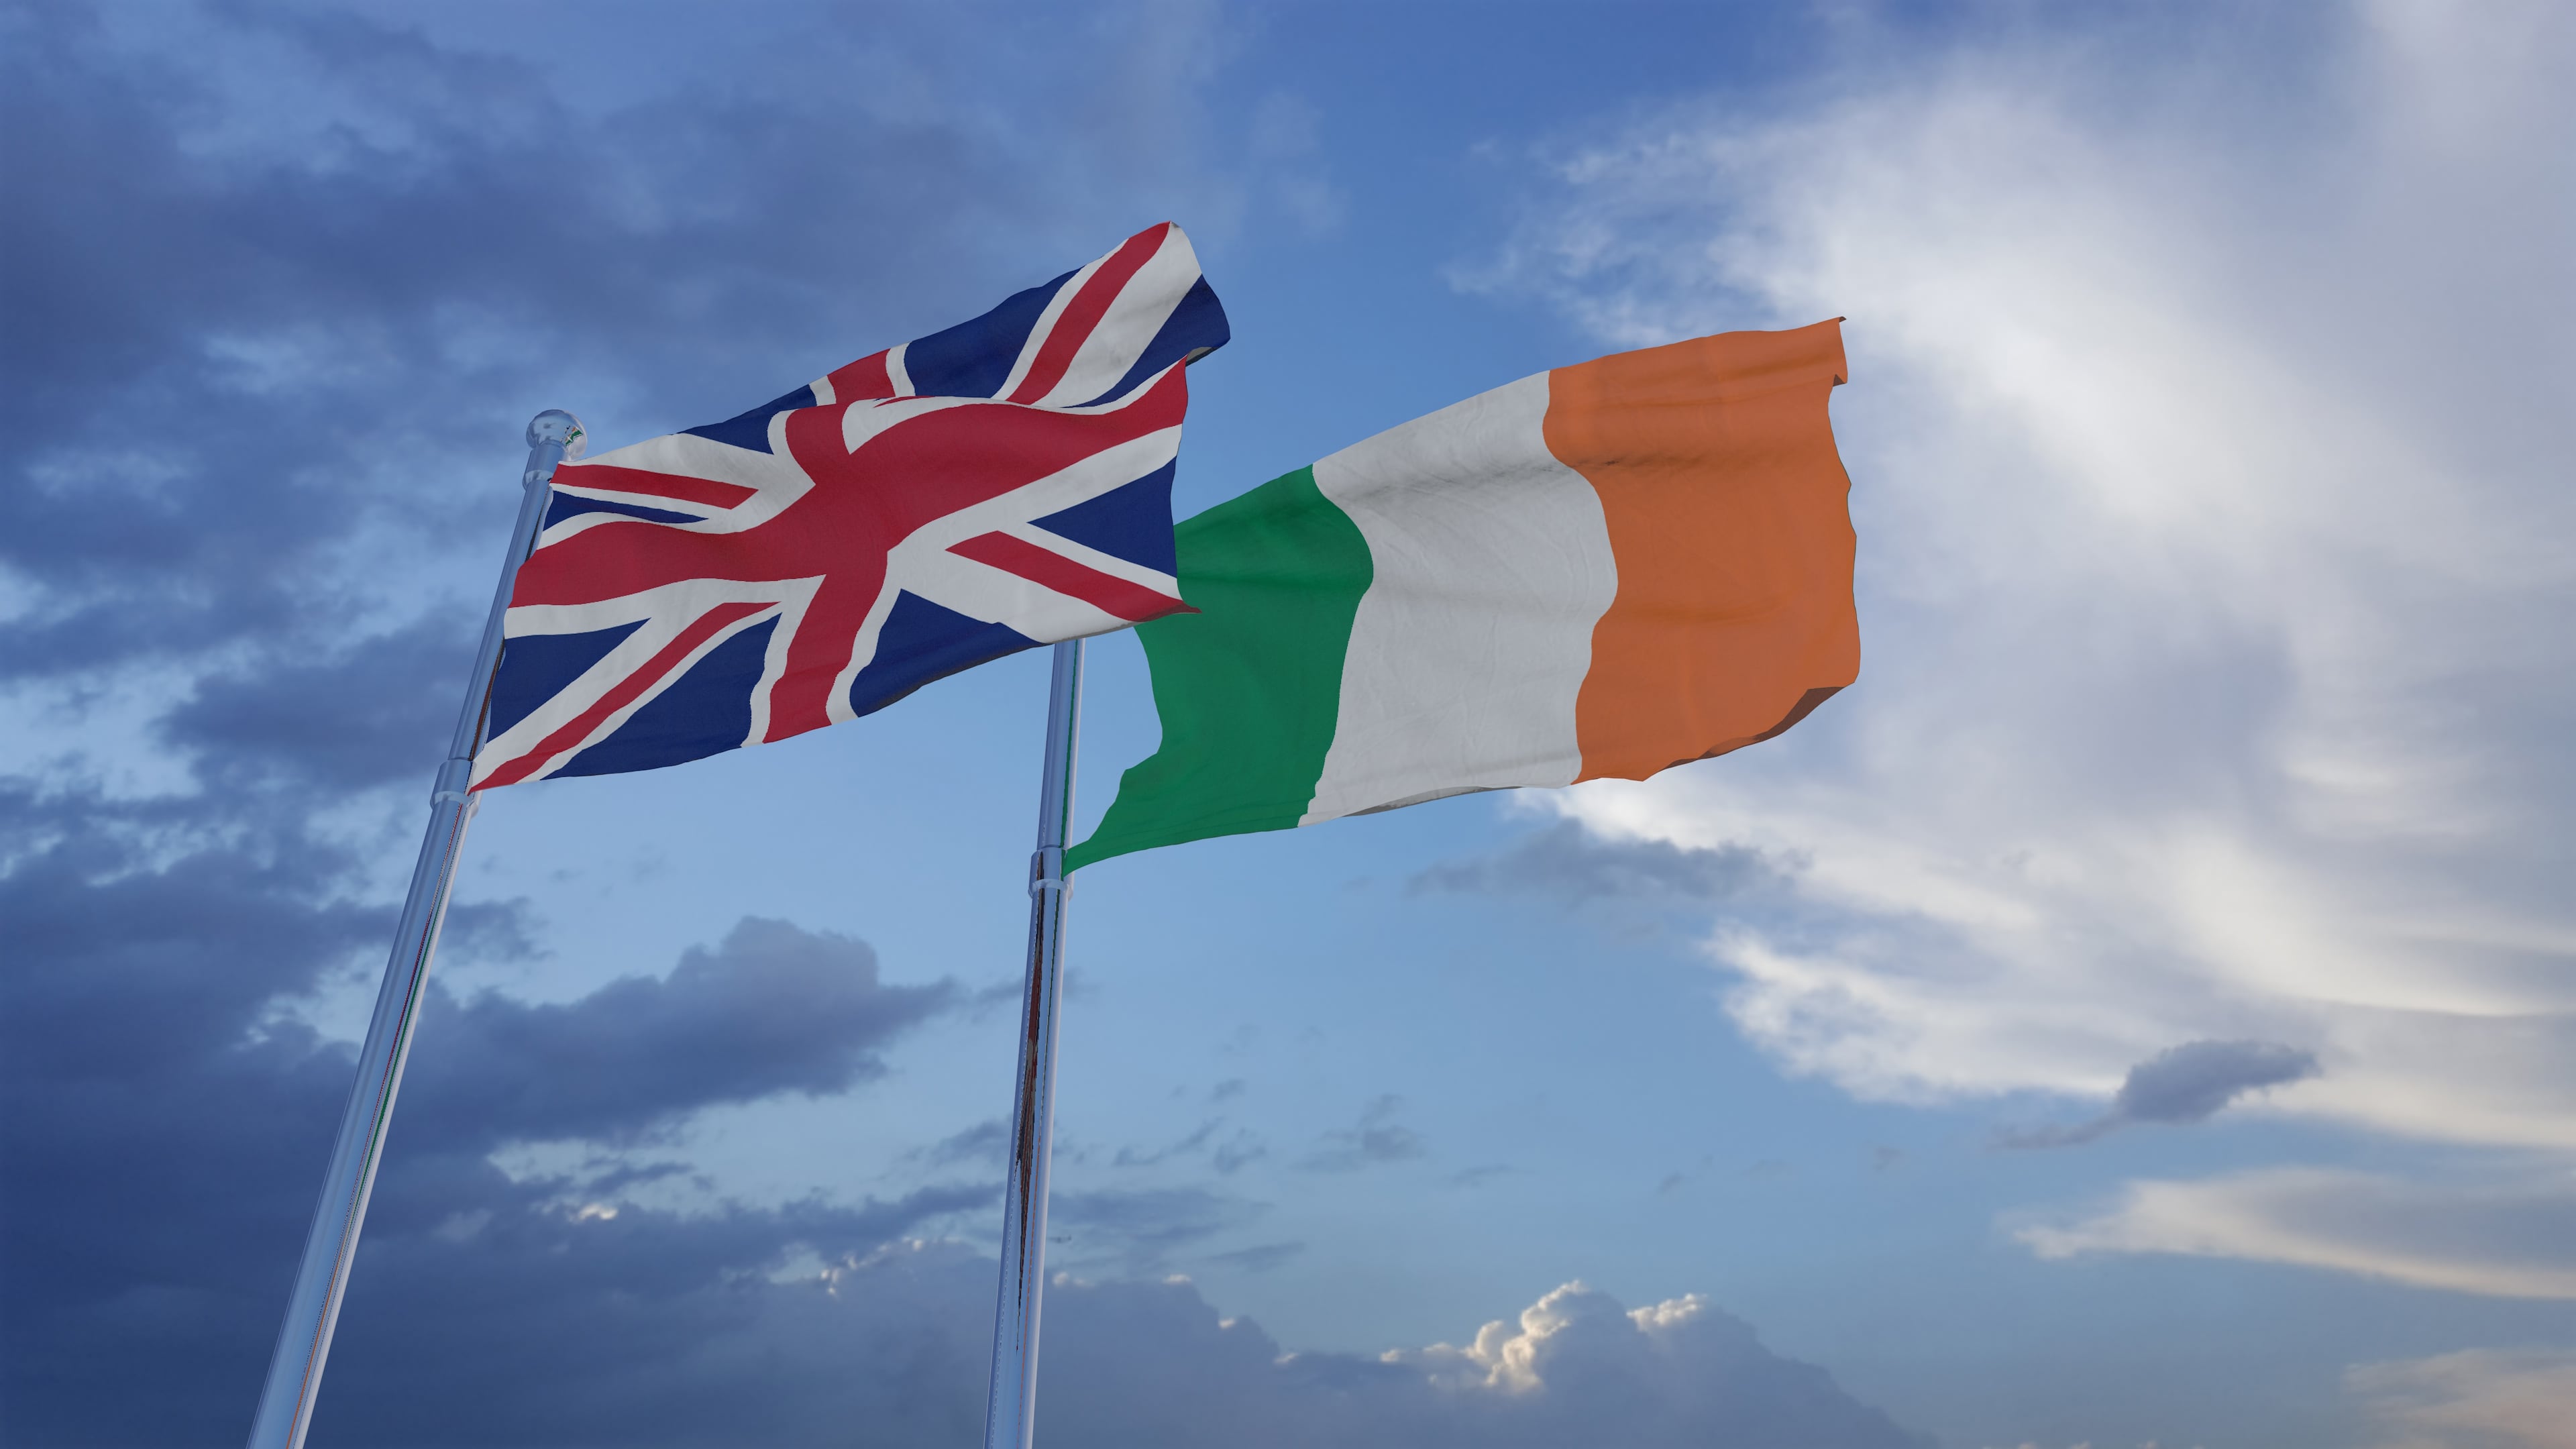 The flags of Ireland the UK on lamposts against a sky